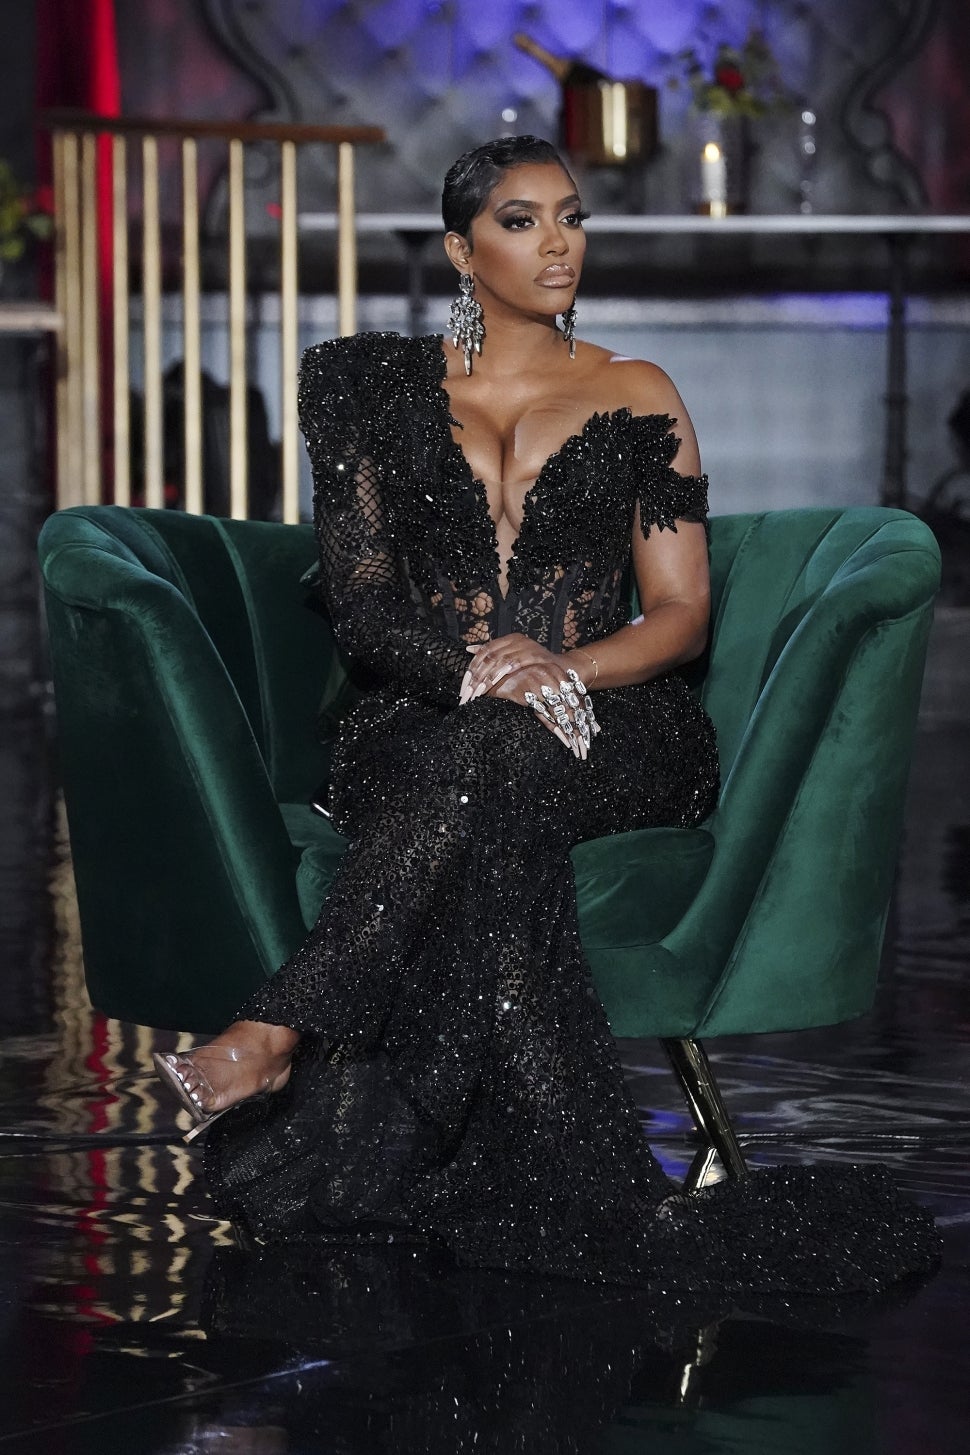 Porsha Williams attends the season 13 reunion for Bravo's The Real Housewives of Atlanta